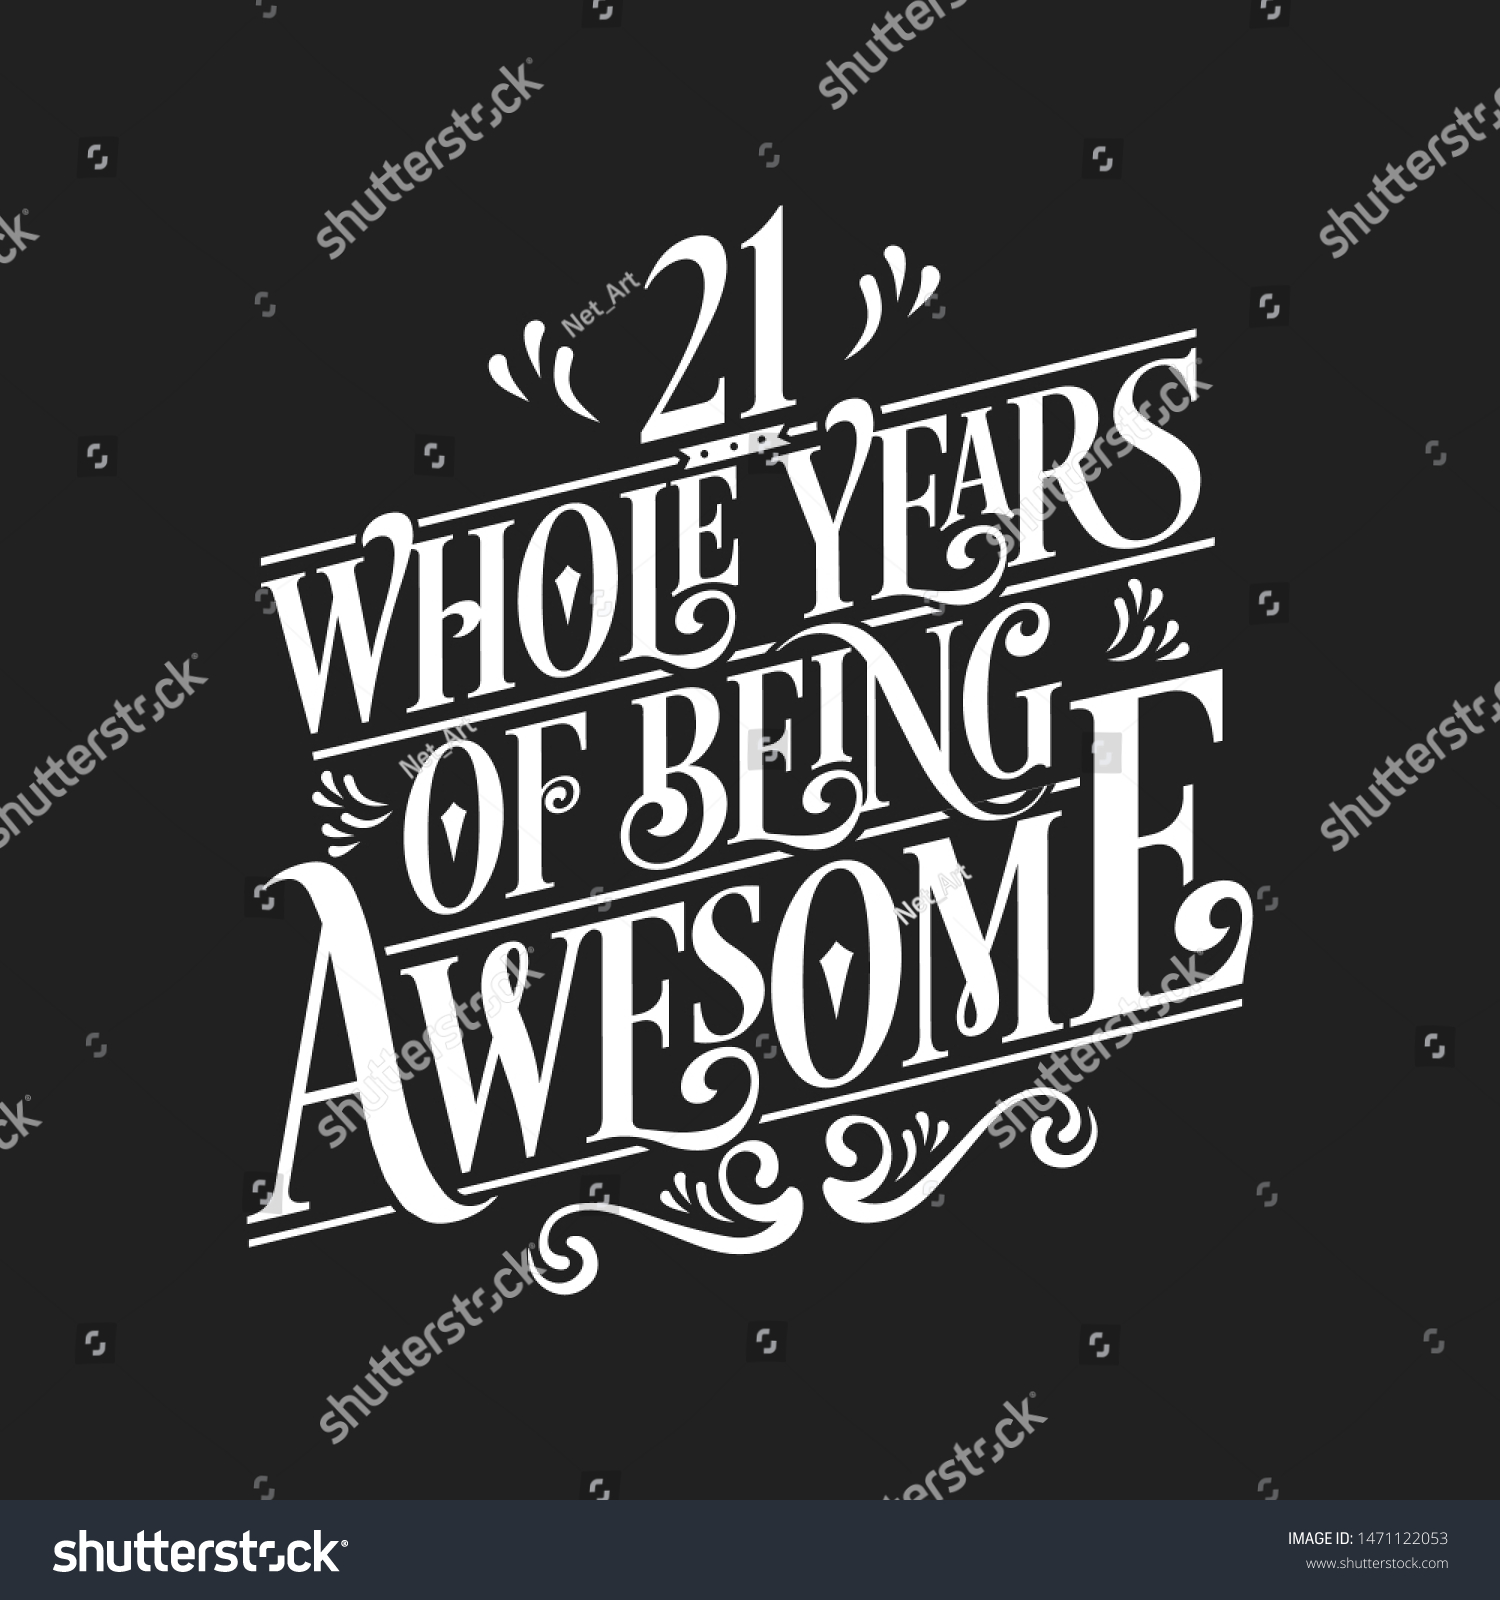 SVG of 21 Whole Years Of Being Awesome - 21st Birthday And Wedding  Anniversary Typographic Design Vector svg